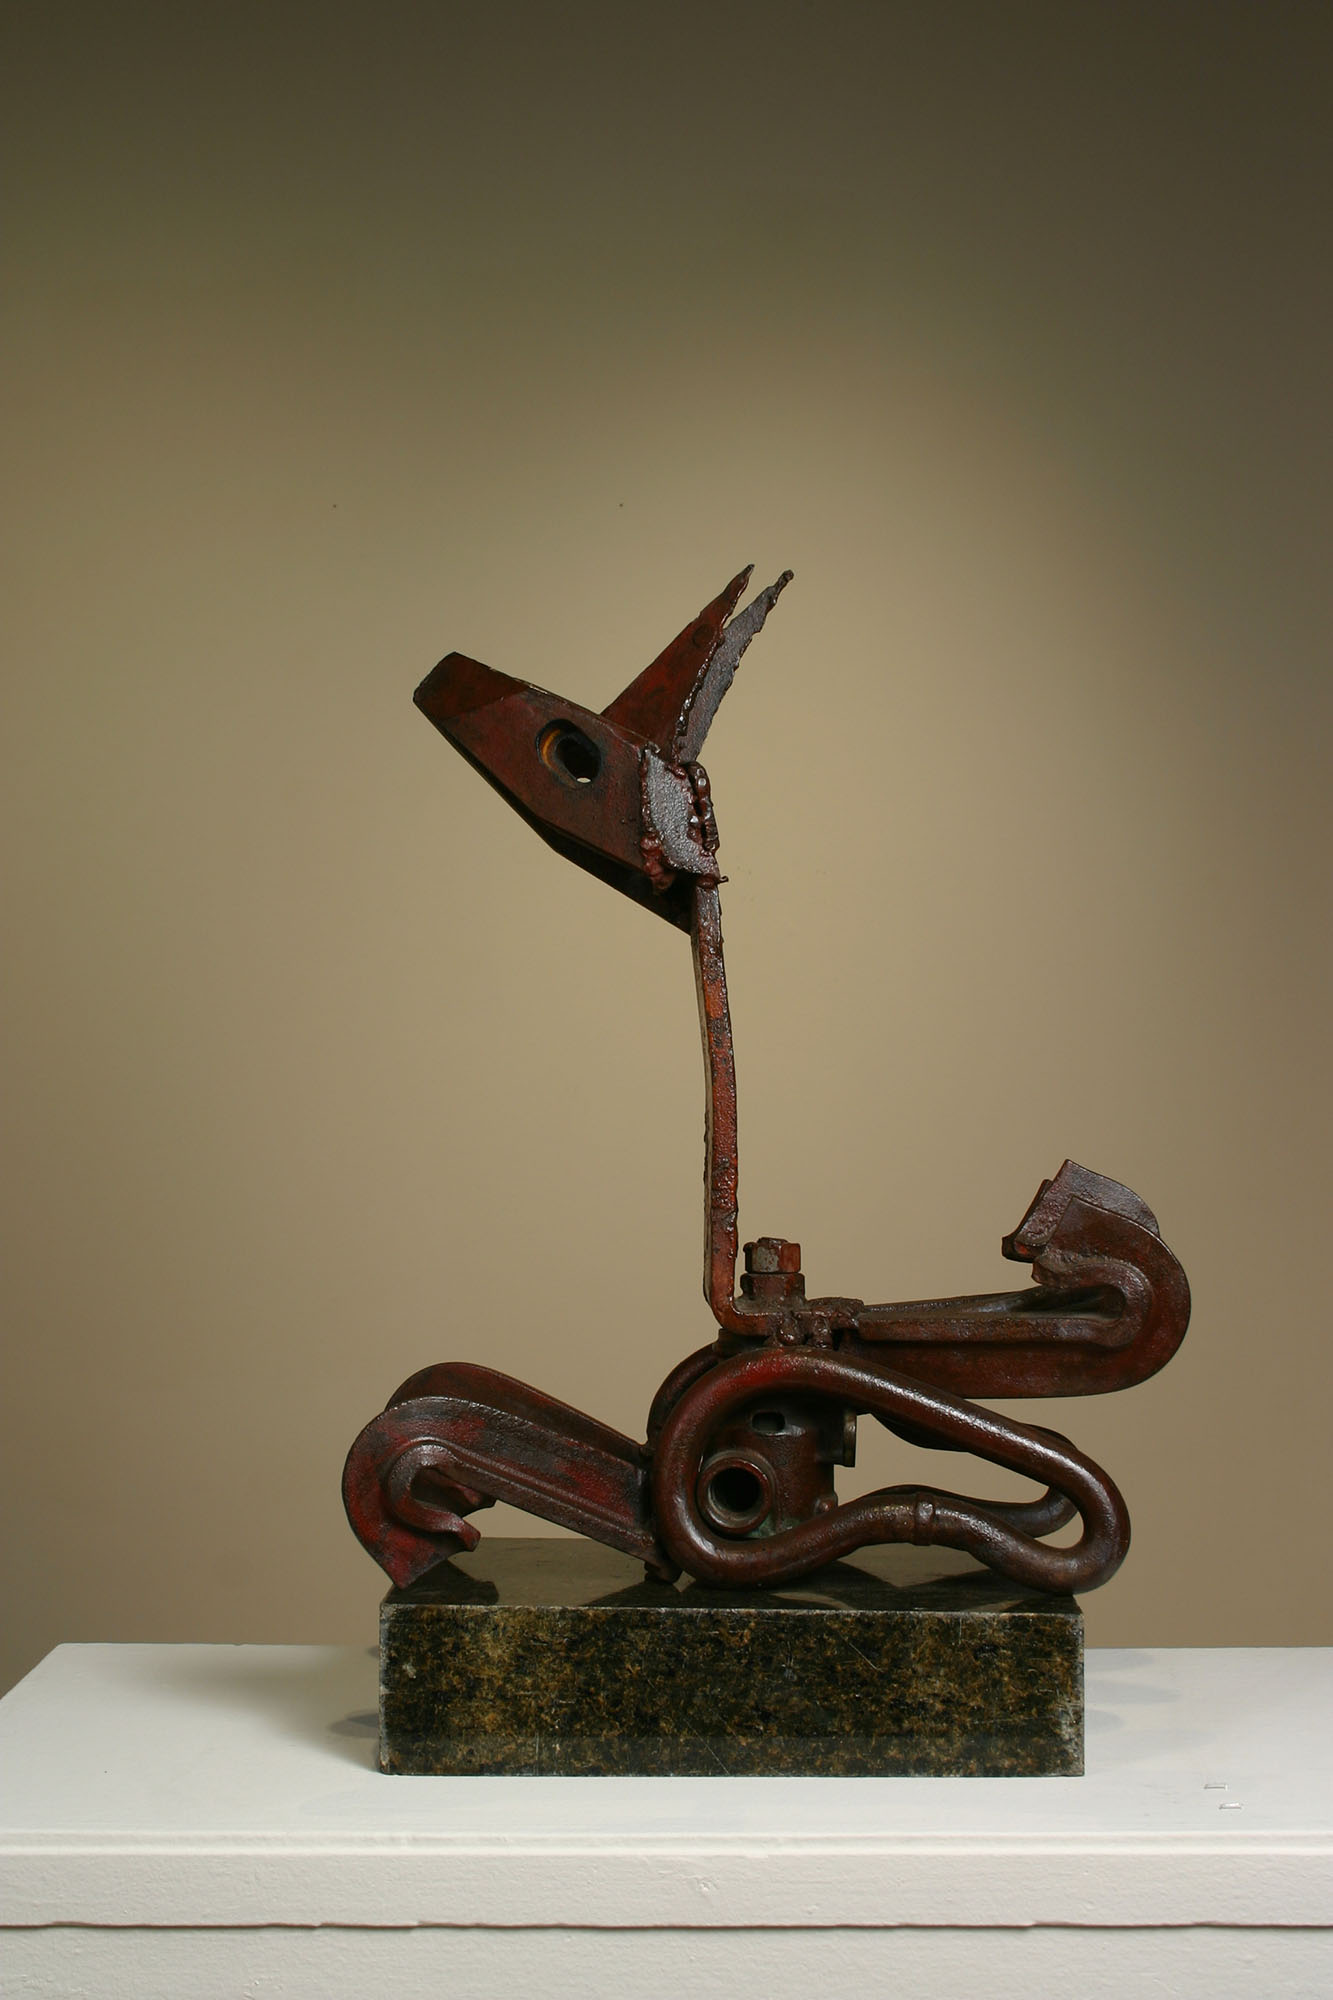 William Iaculla, Anubis, 1983. Mixed media, steel and granite base. Courtesy of the artist.